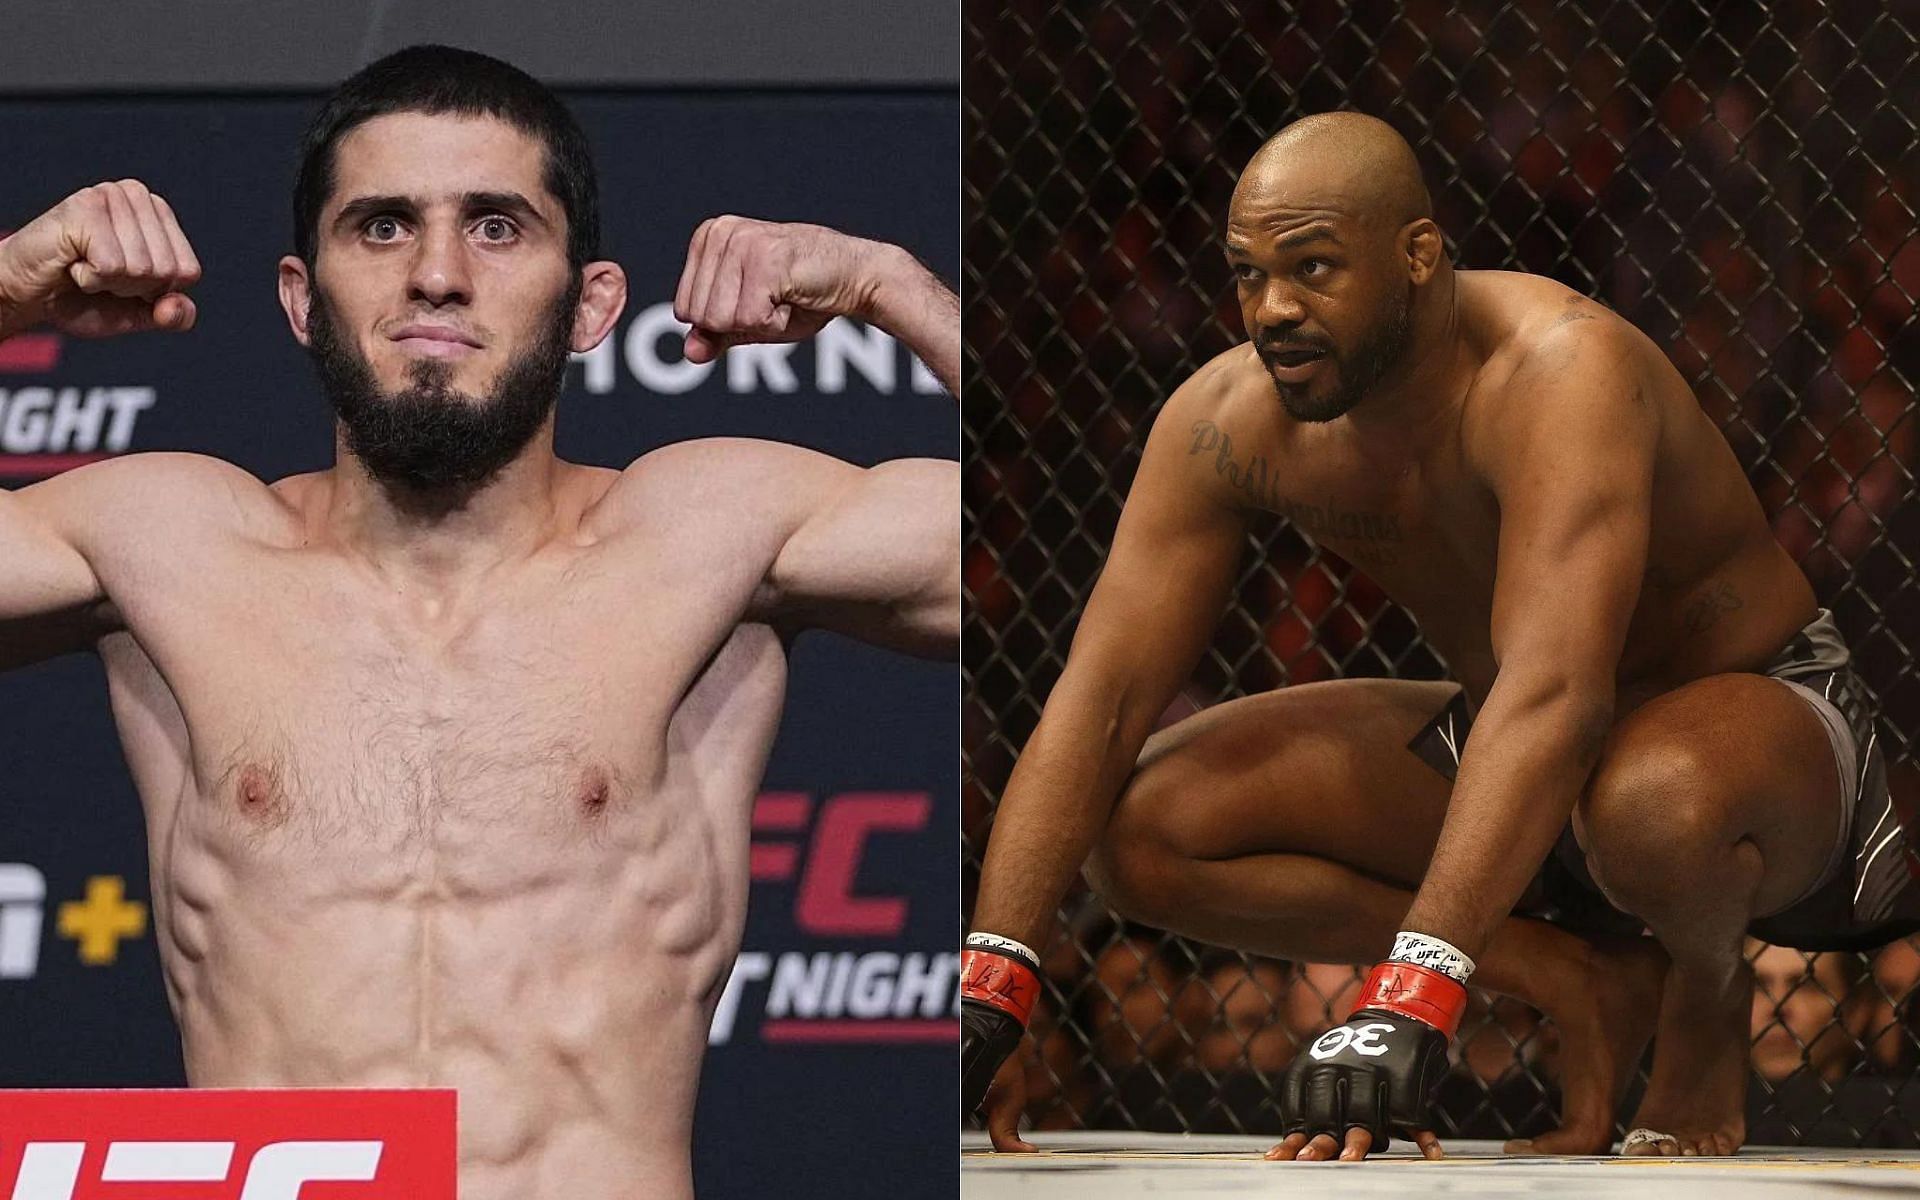 Islam Makhachev (left) takes a dig at Jon Jones (right) [Image courtesy: Getty]